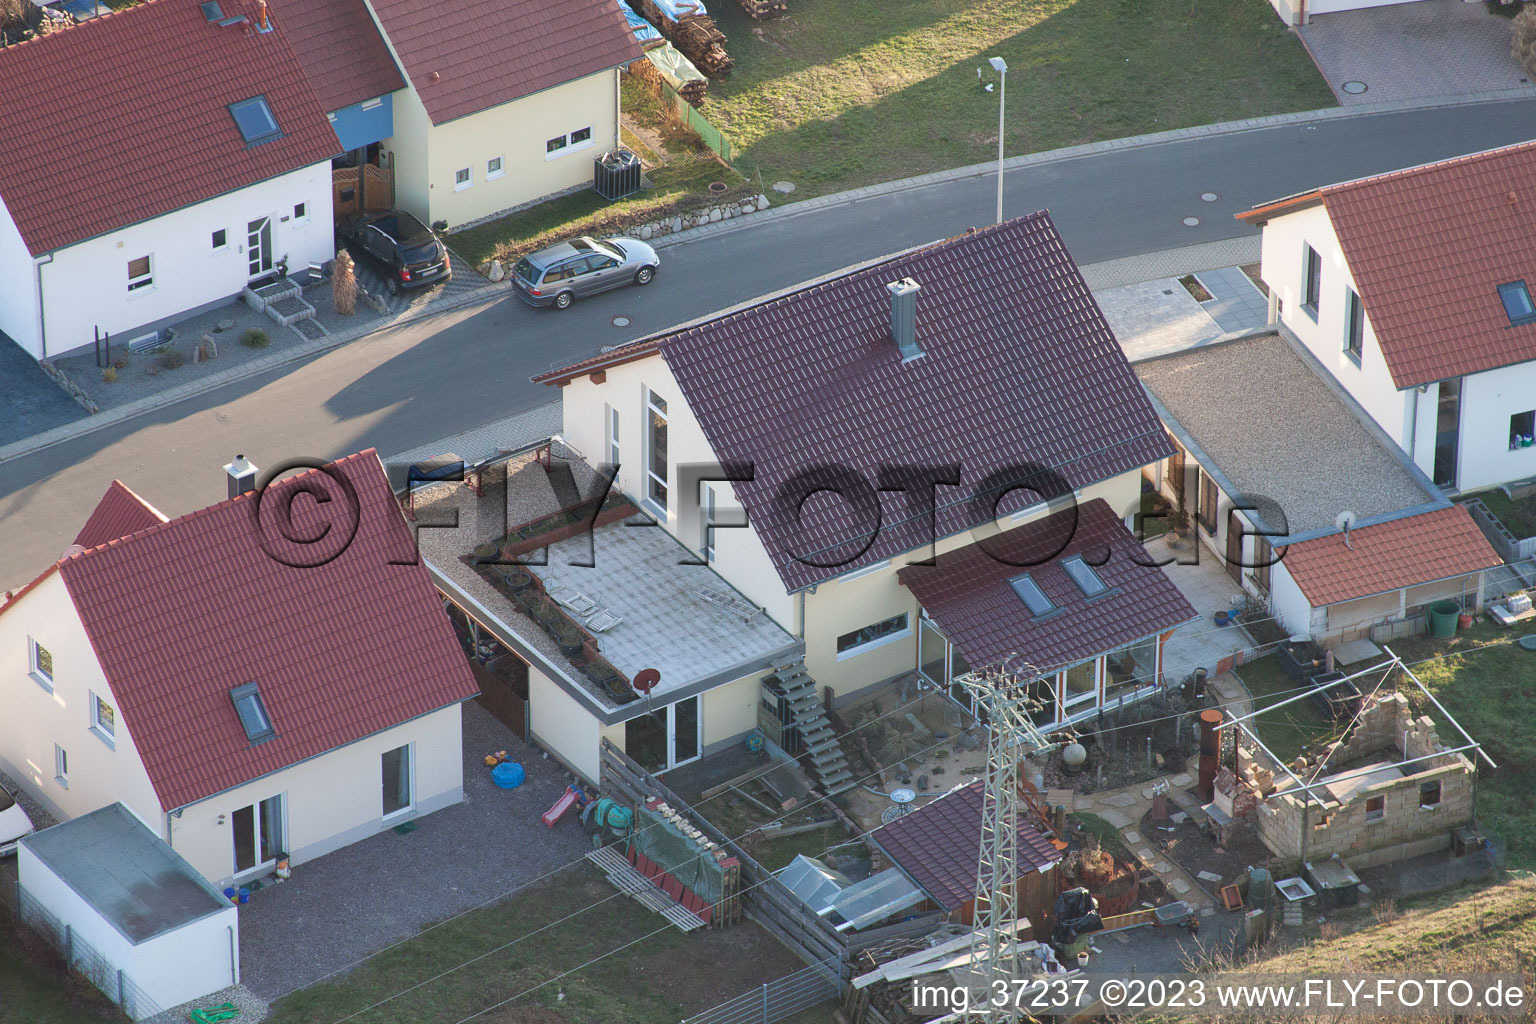 New development area NE in the district Schaidt in Wörth am Rhein in the state Rhineland-Palatinate, Germany from the drone perspective